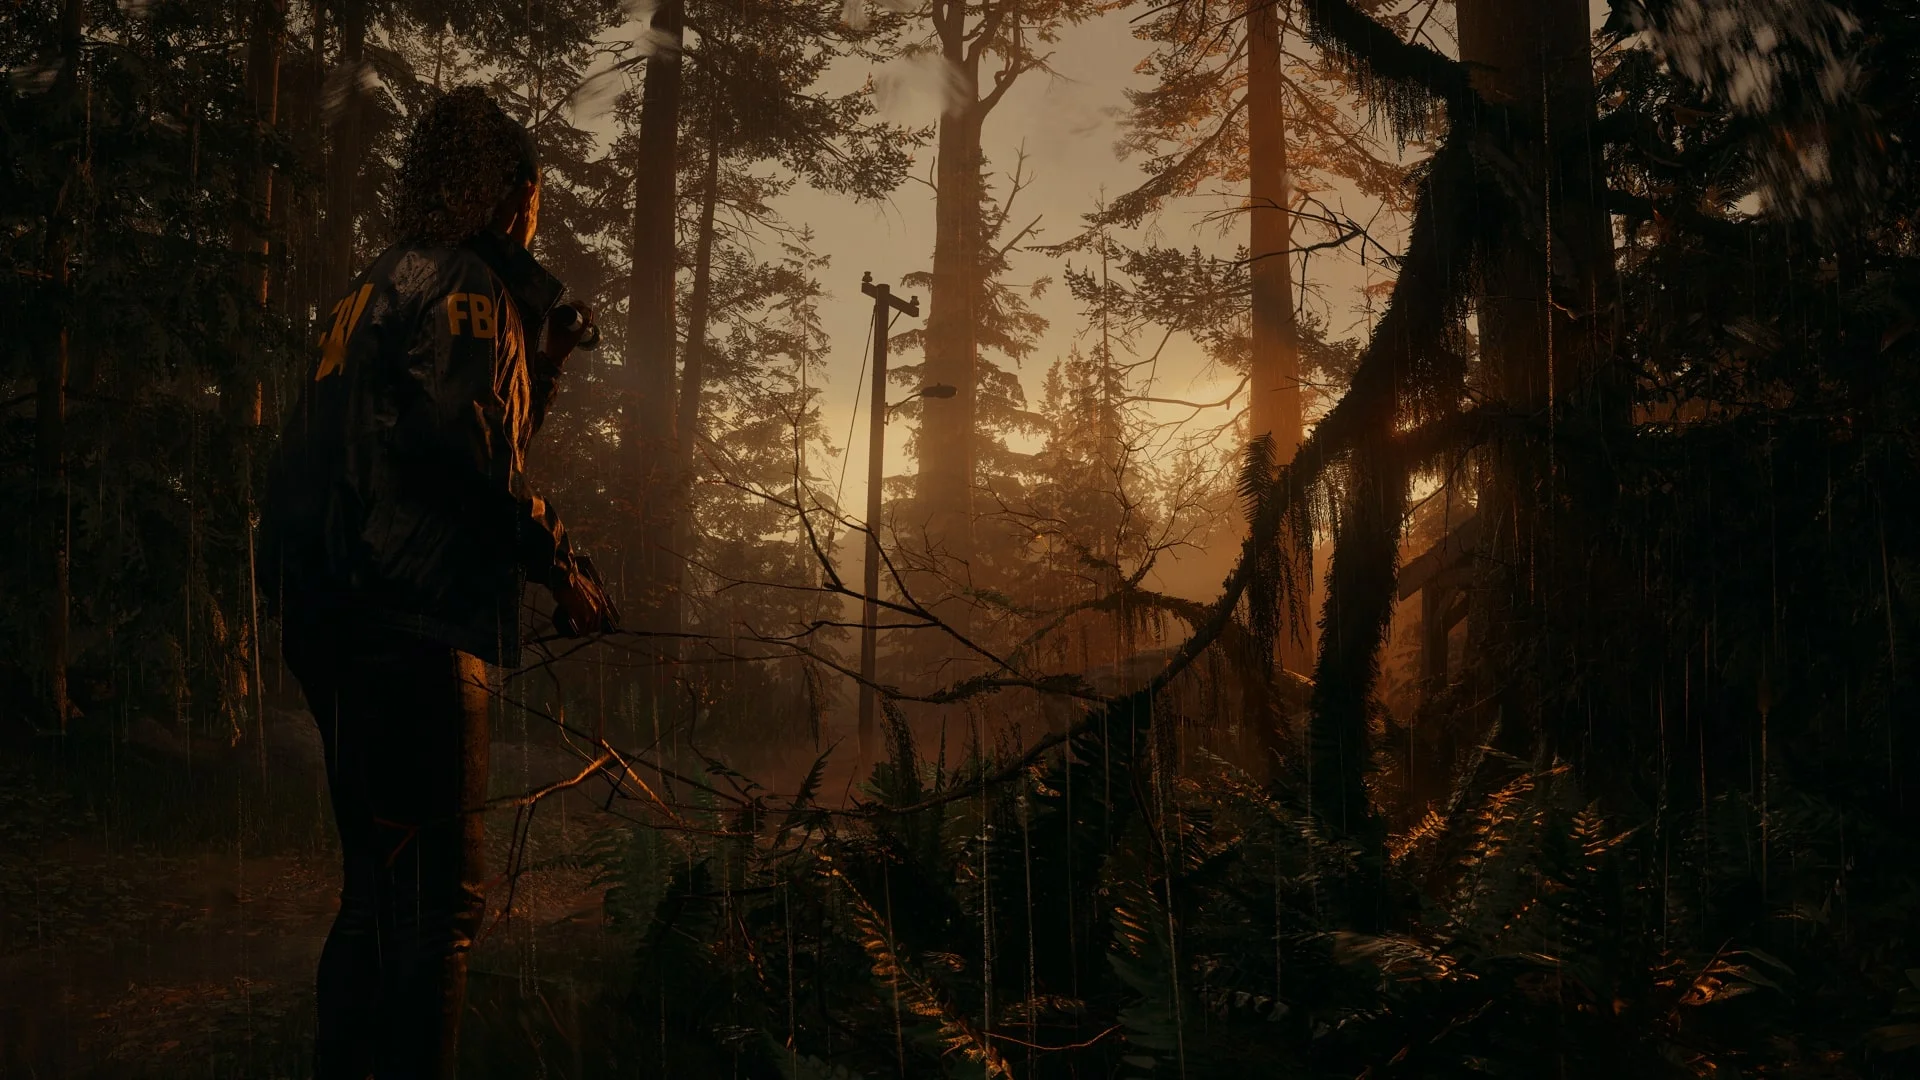 Showing 11 minutes of Alan Wake sequel